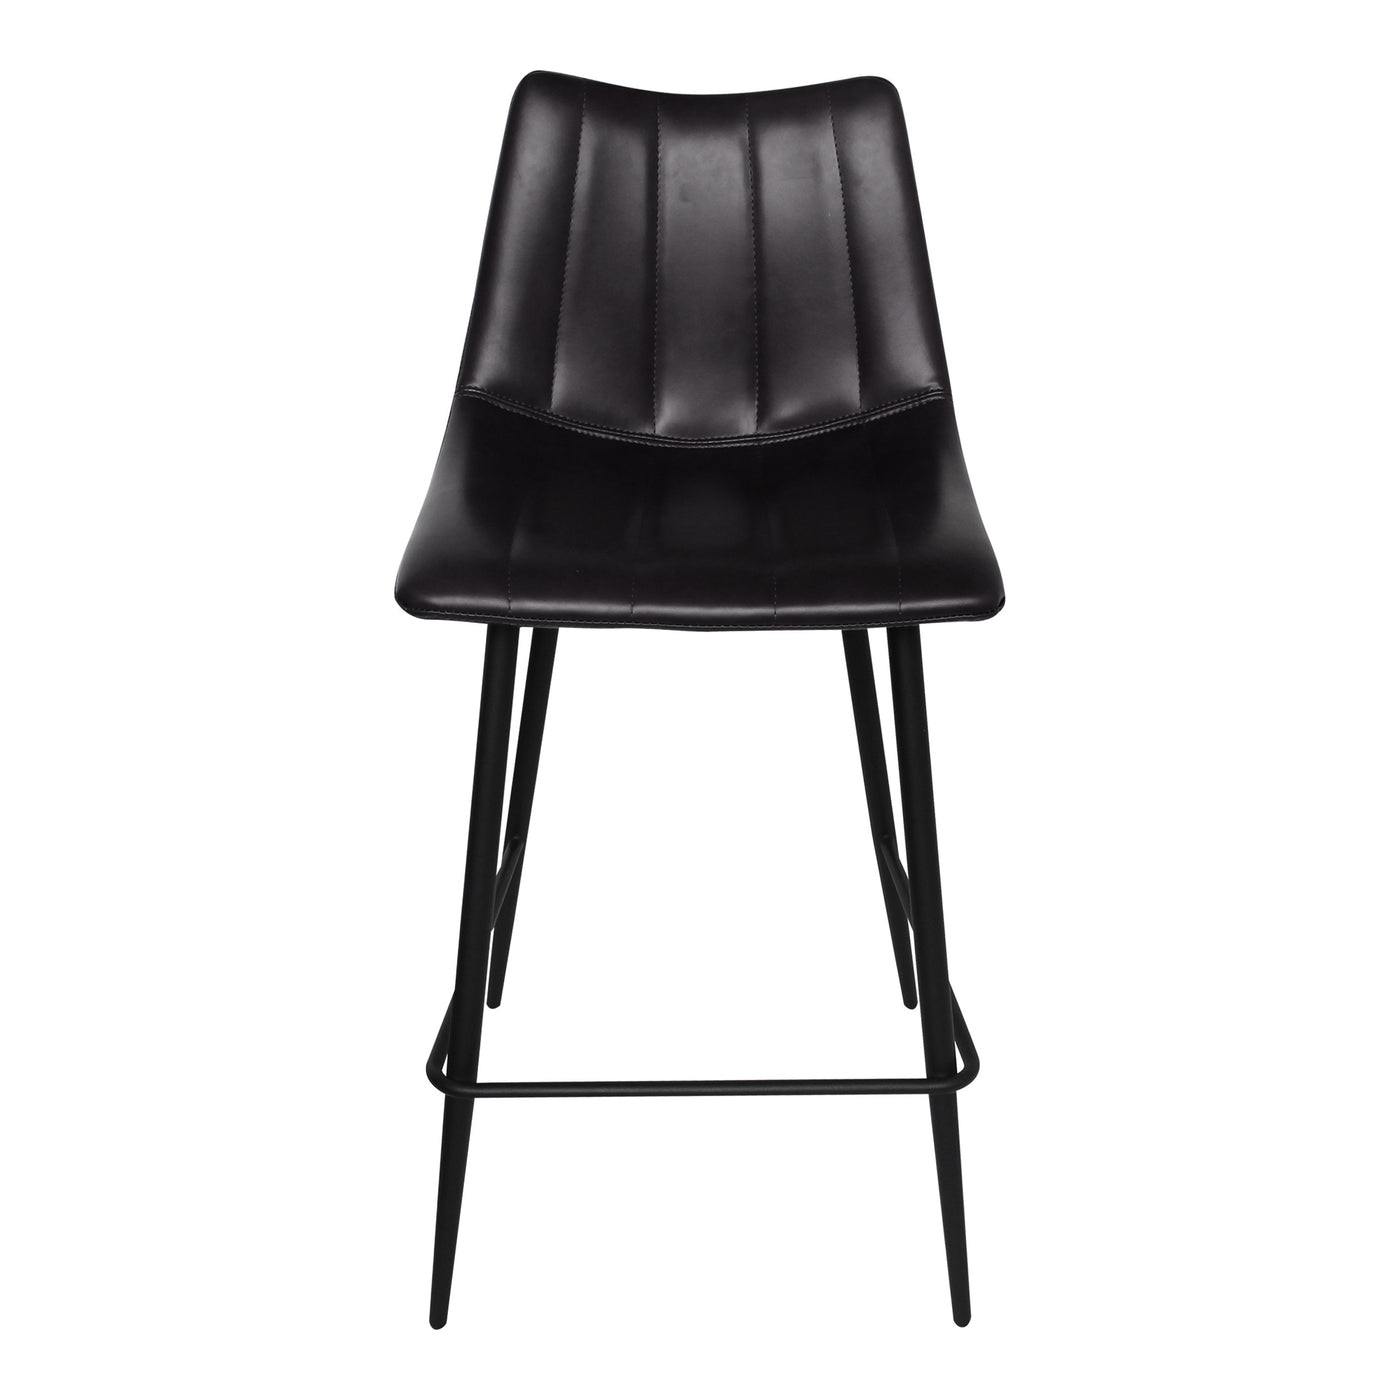 Contemporary modern counter stools get a new take with this sleek aesthetic. The Alibi counter stool features striking ver...